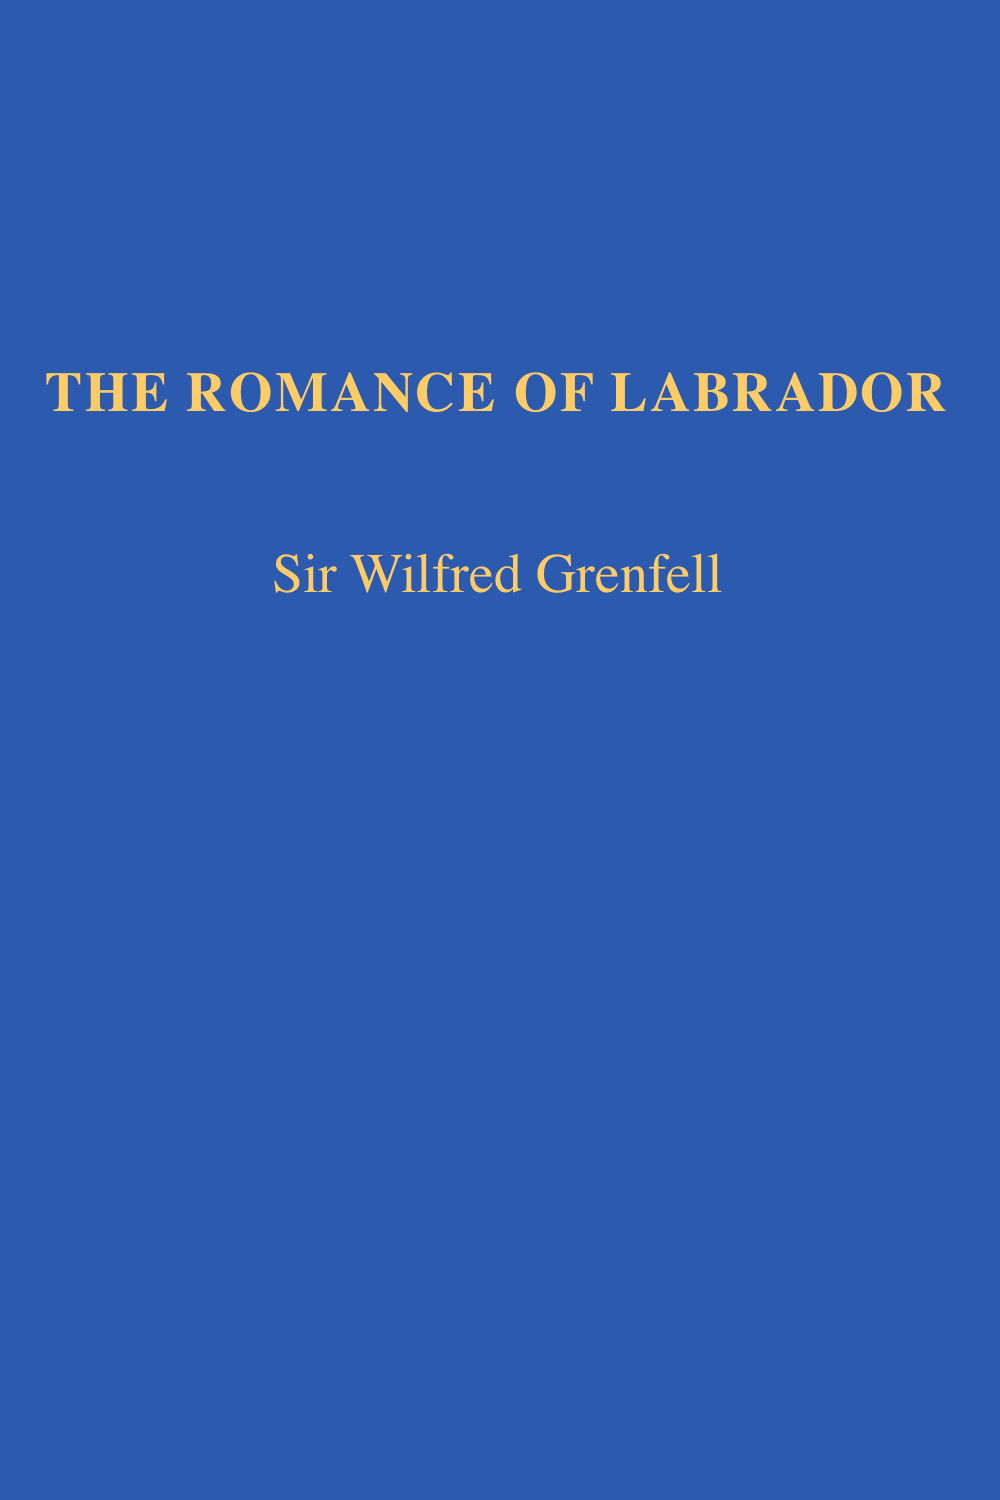 The Distributed Proofreaders Canada eBook of The Romance of Labrador